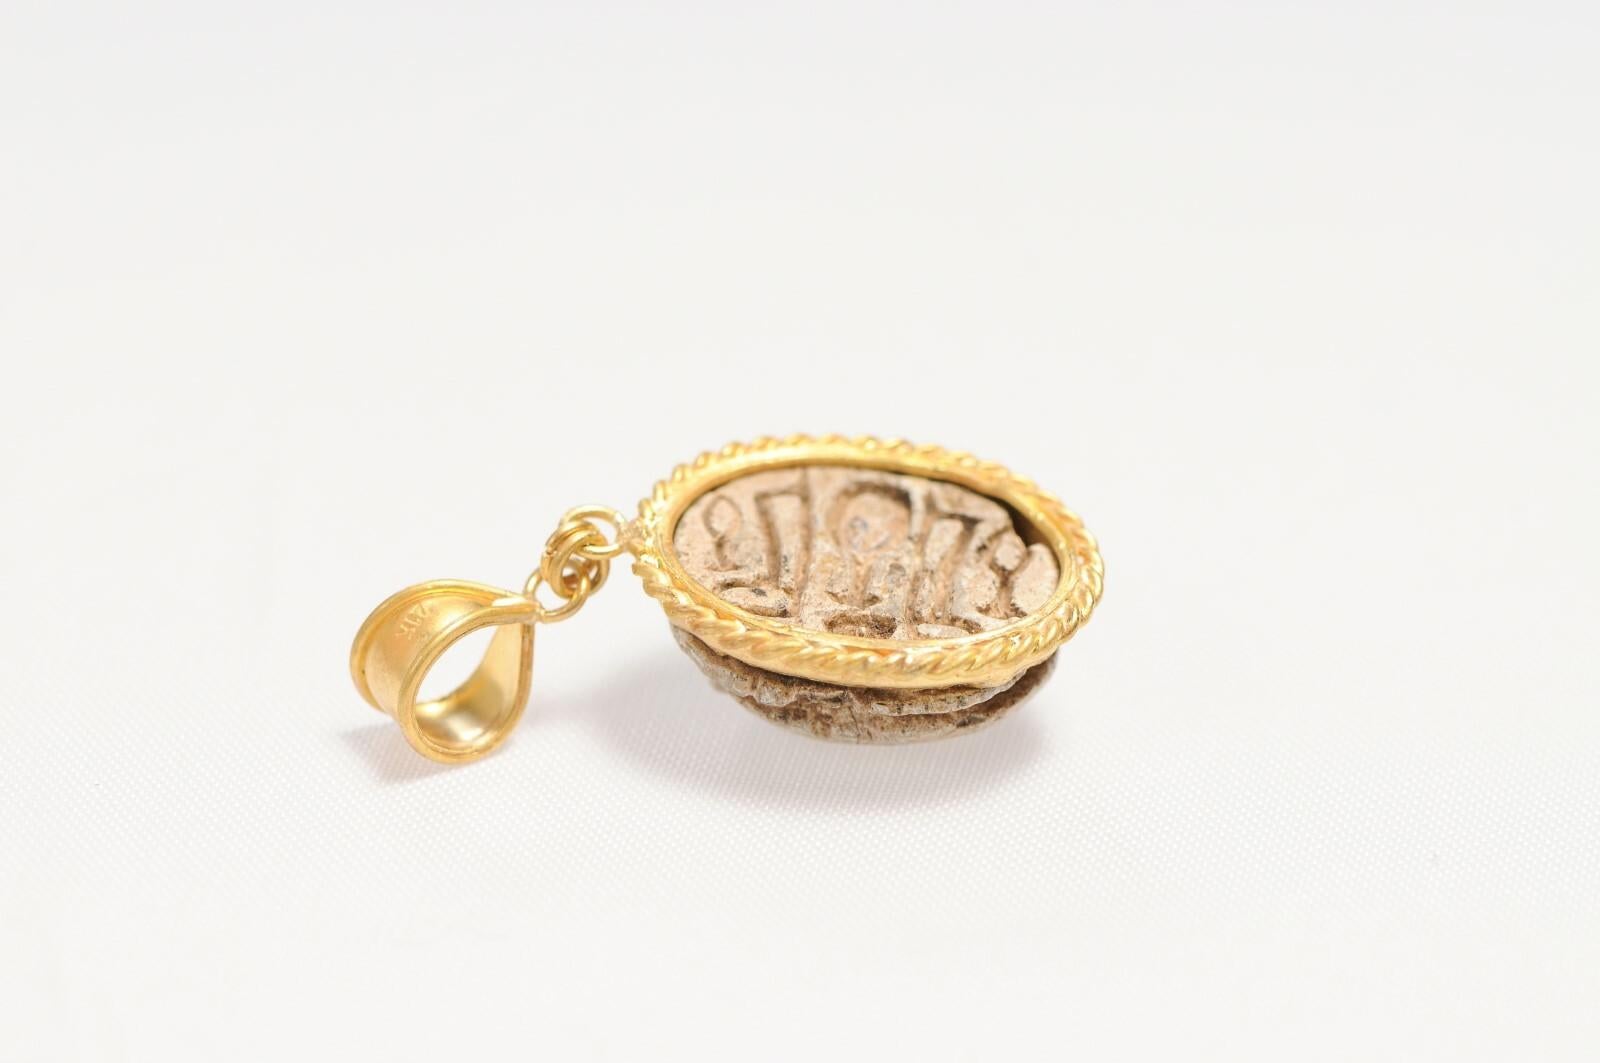 Egyptian Scarab w/ Seal Pendant in 21K gold For Sale 3